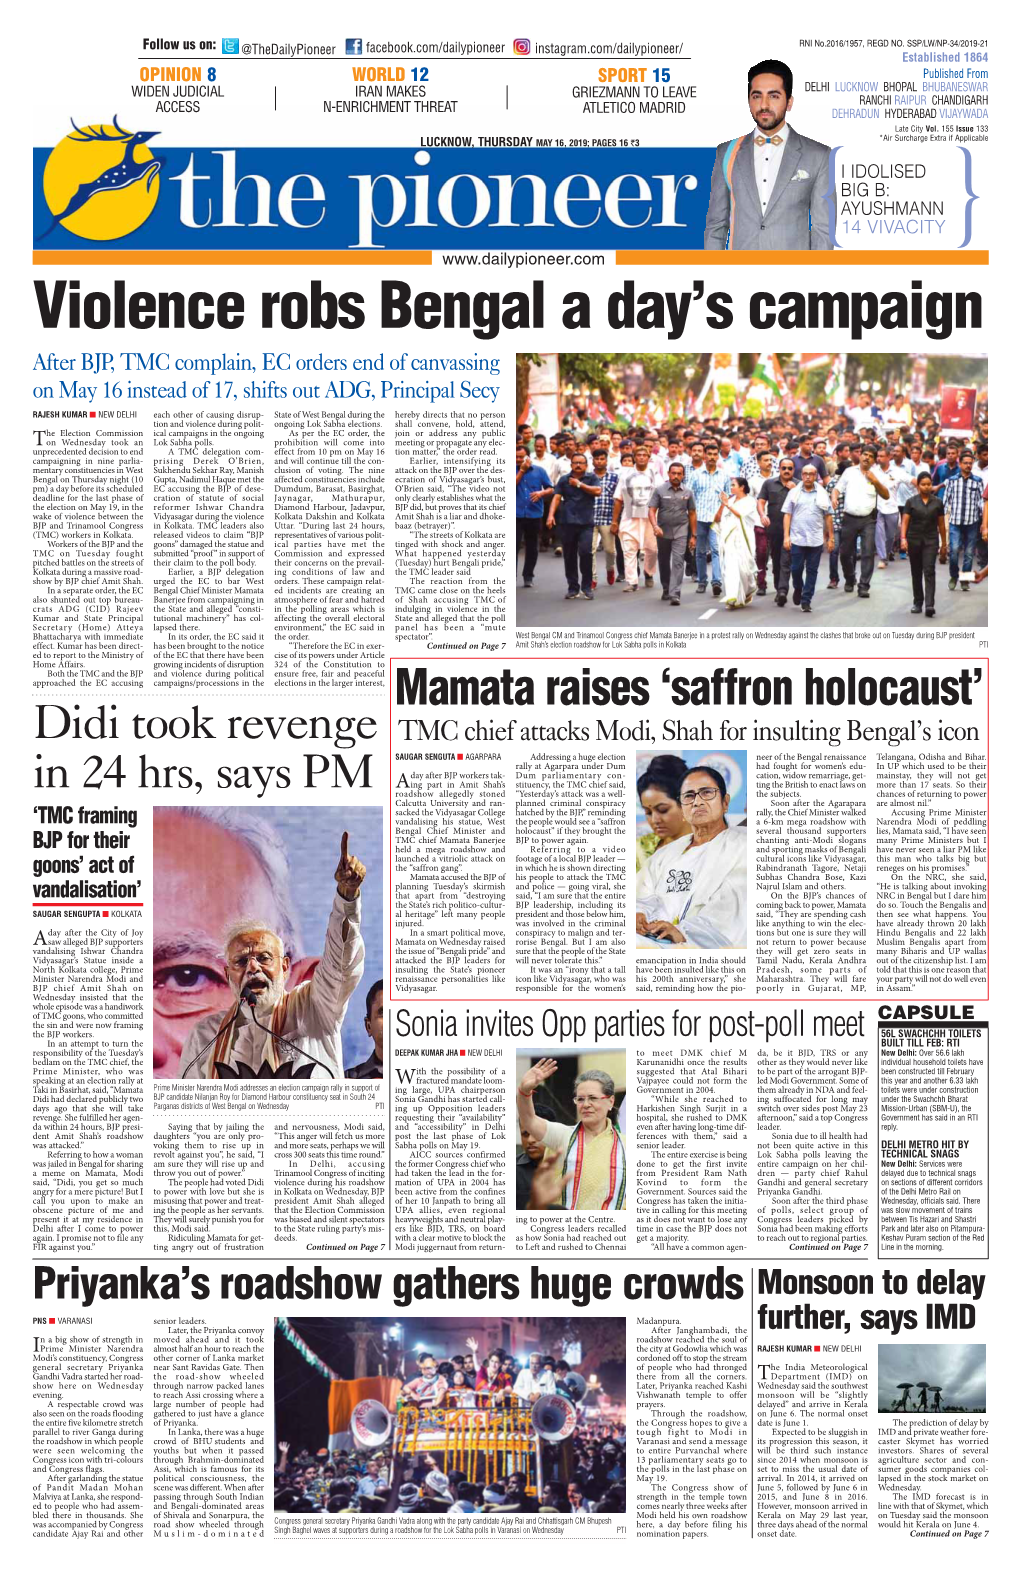 Violence Robs Bengal a Day's Campaign